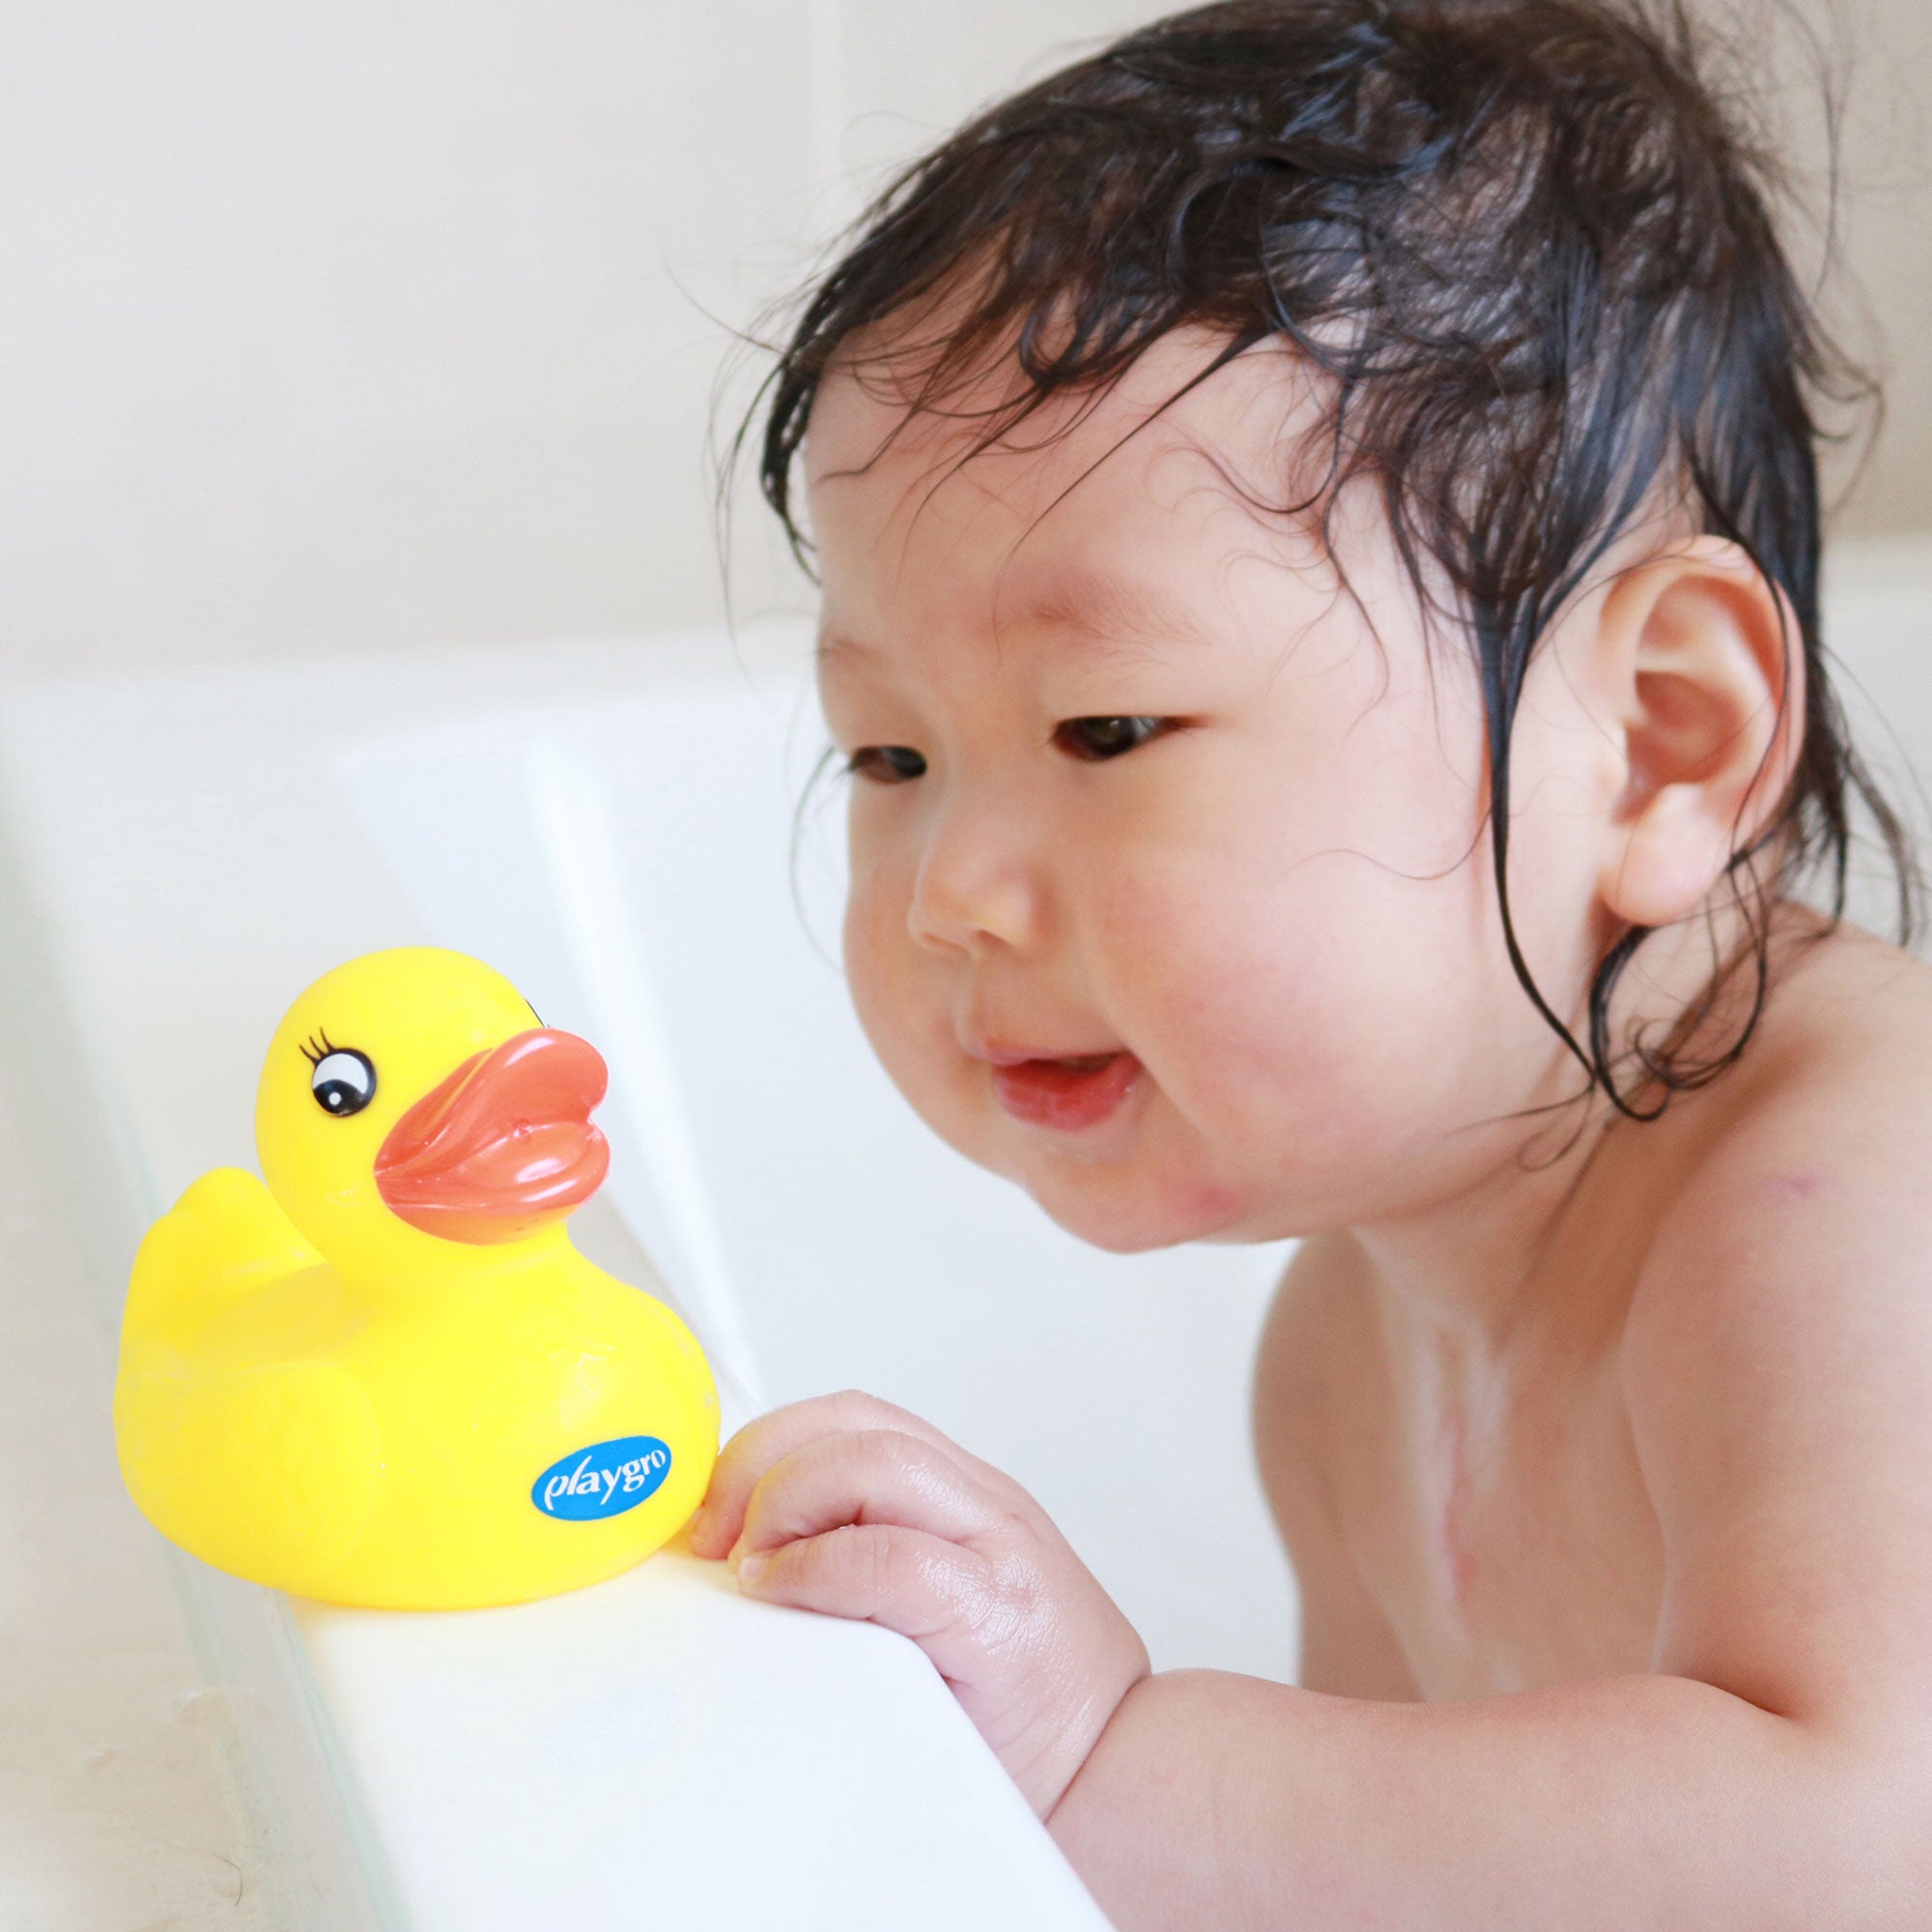 A toddler girl is playing a rubber duckie at the bath tub